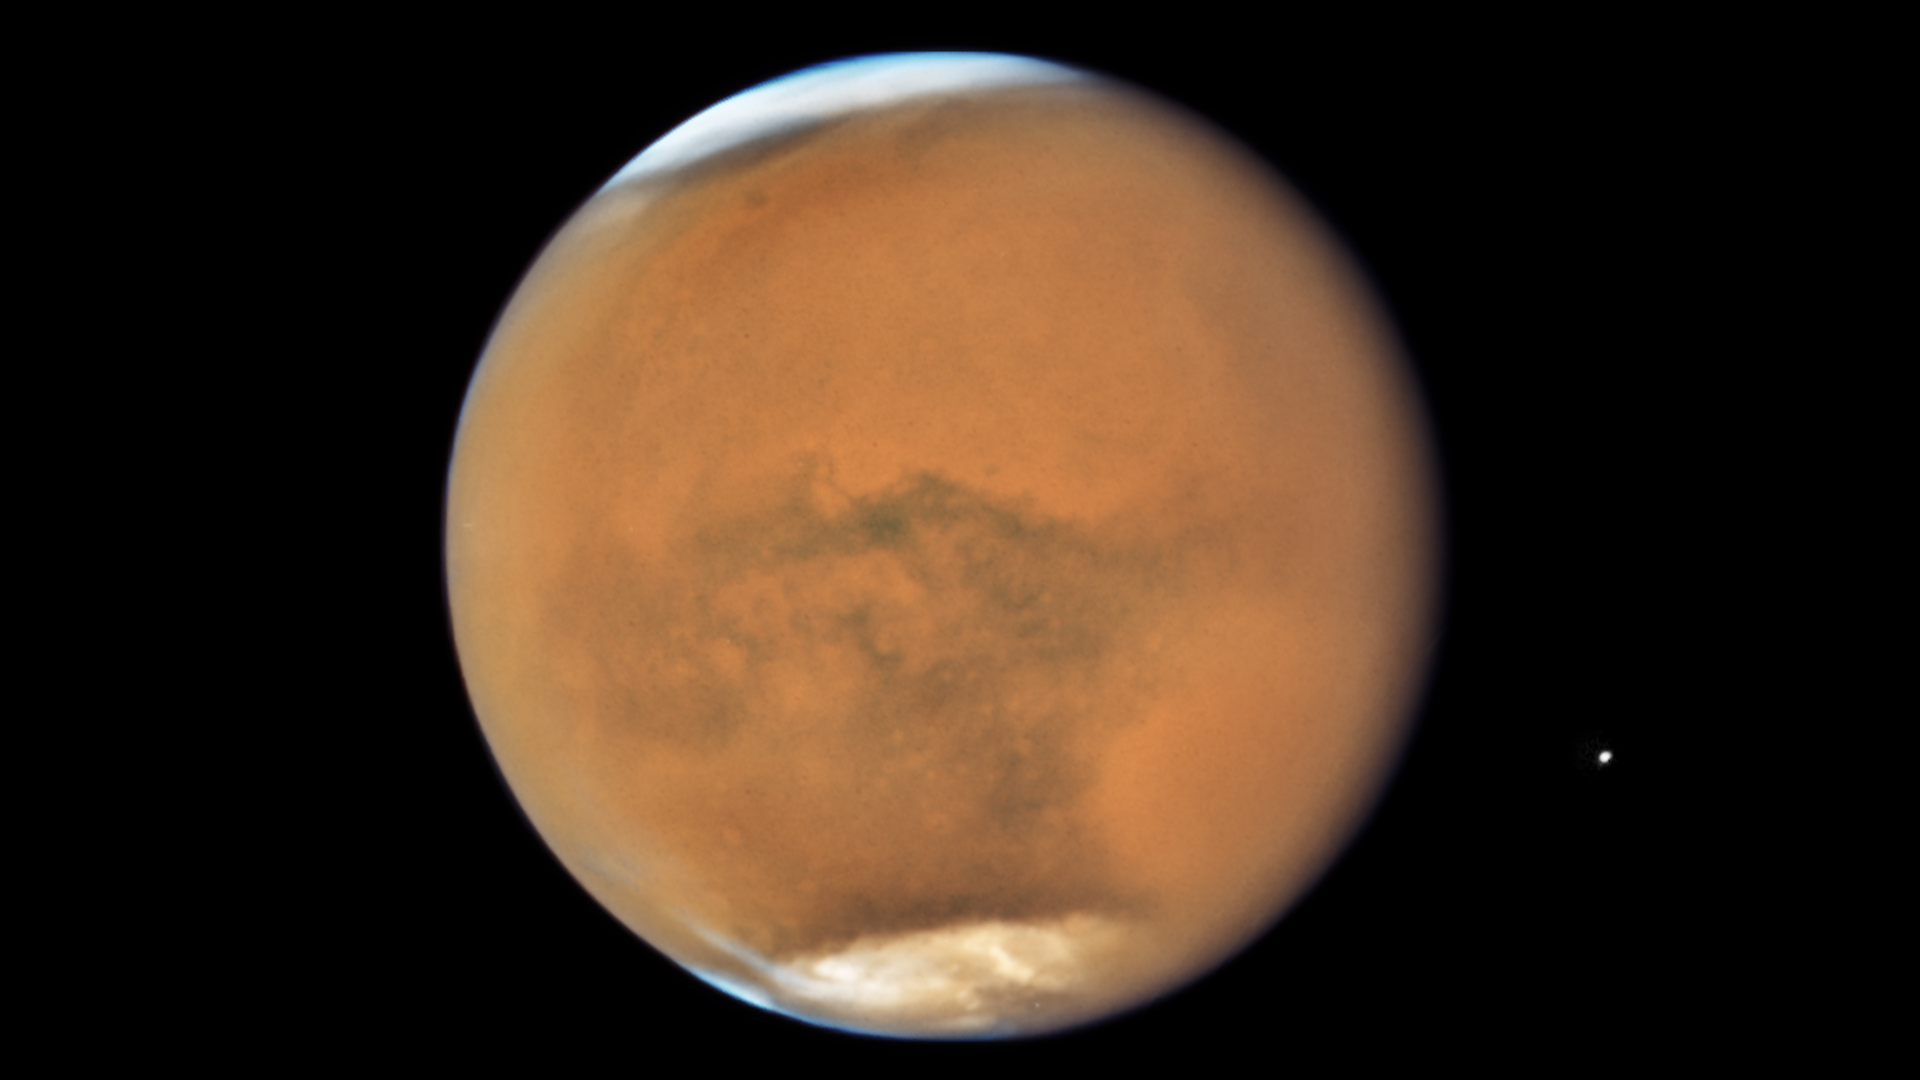 Mars seen by the Hubble Space Telescope